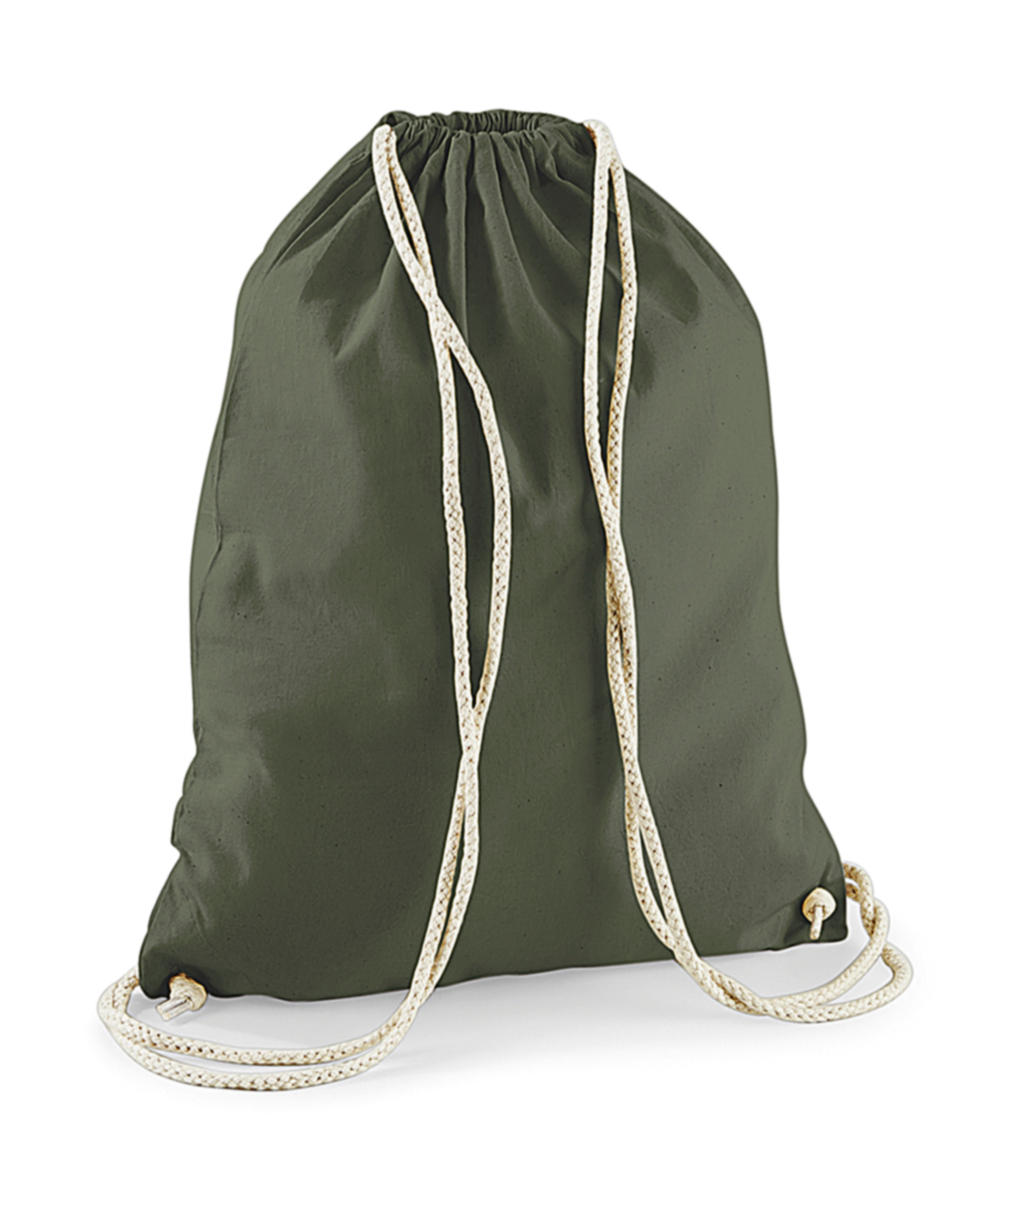  Cotton Gymsac in Farbe Olive